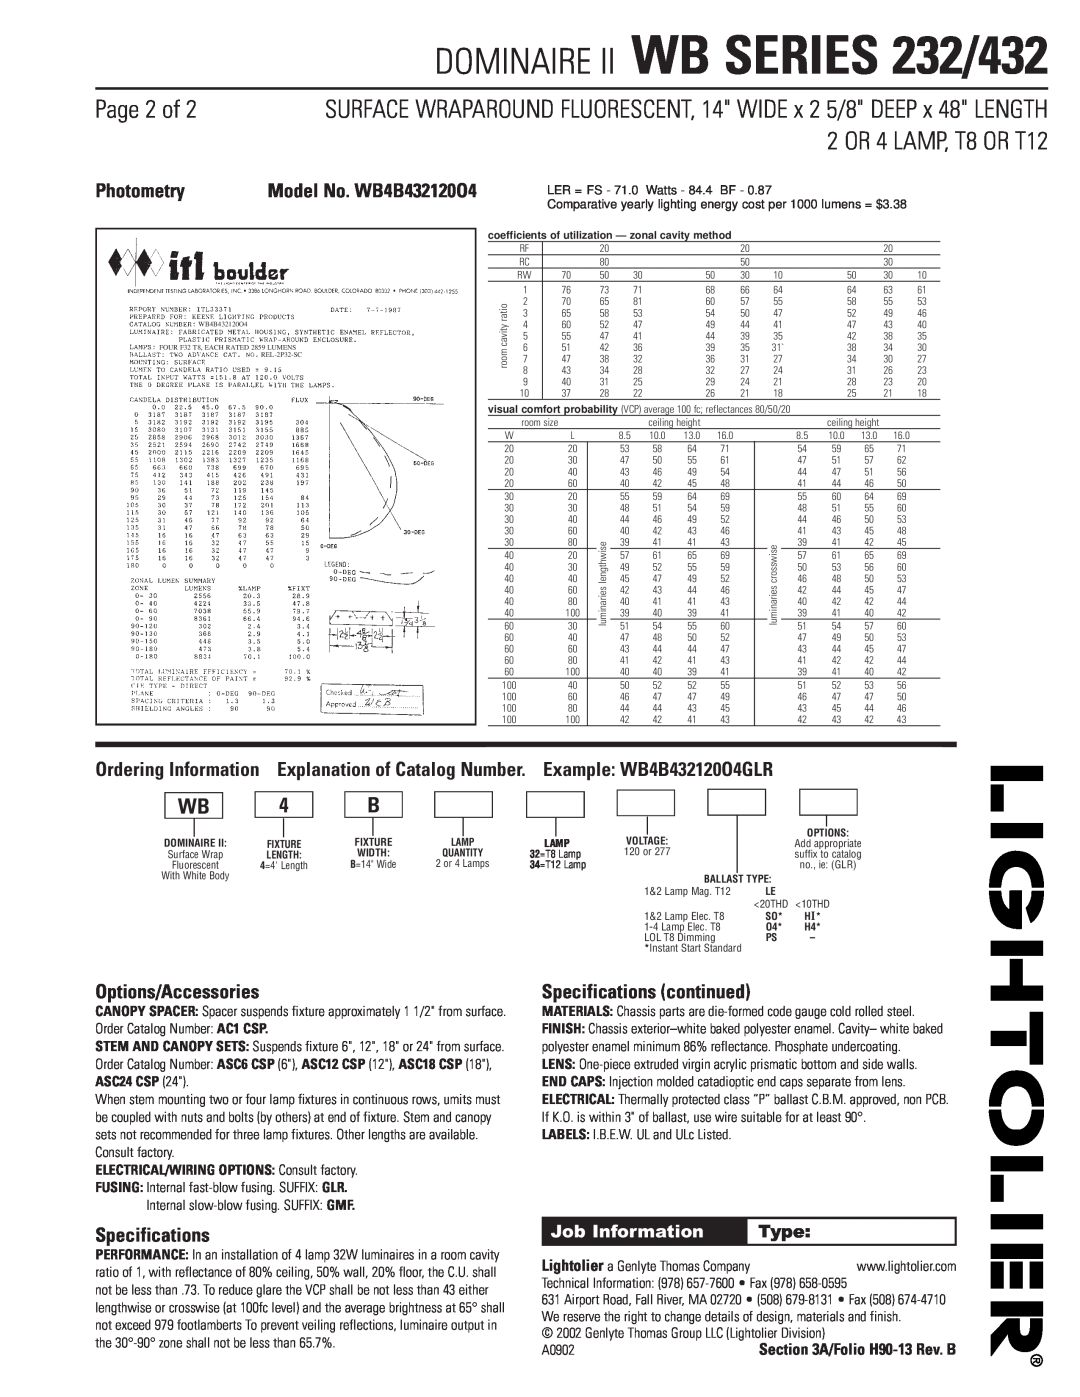 Lightolier WB SERIES 232 Page 2 of, Photometry, Options/Accessories, Specifications continued, 2 OR 4 LAMP, T8 OR T12 